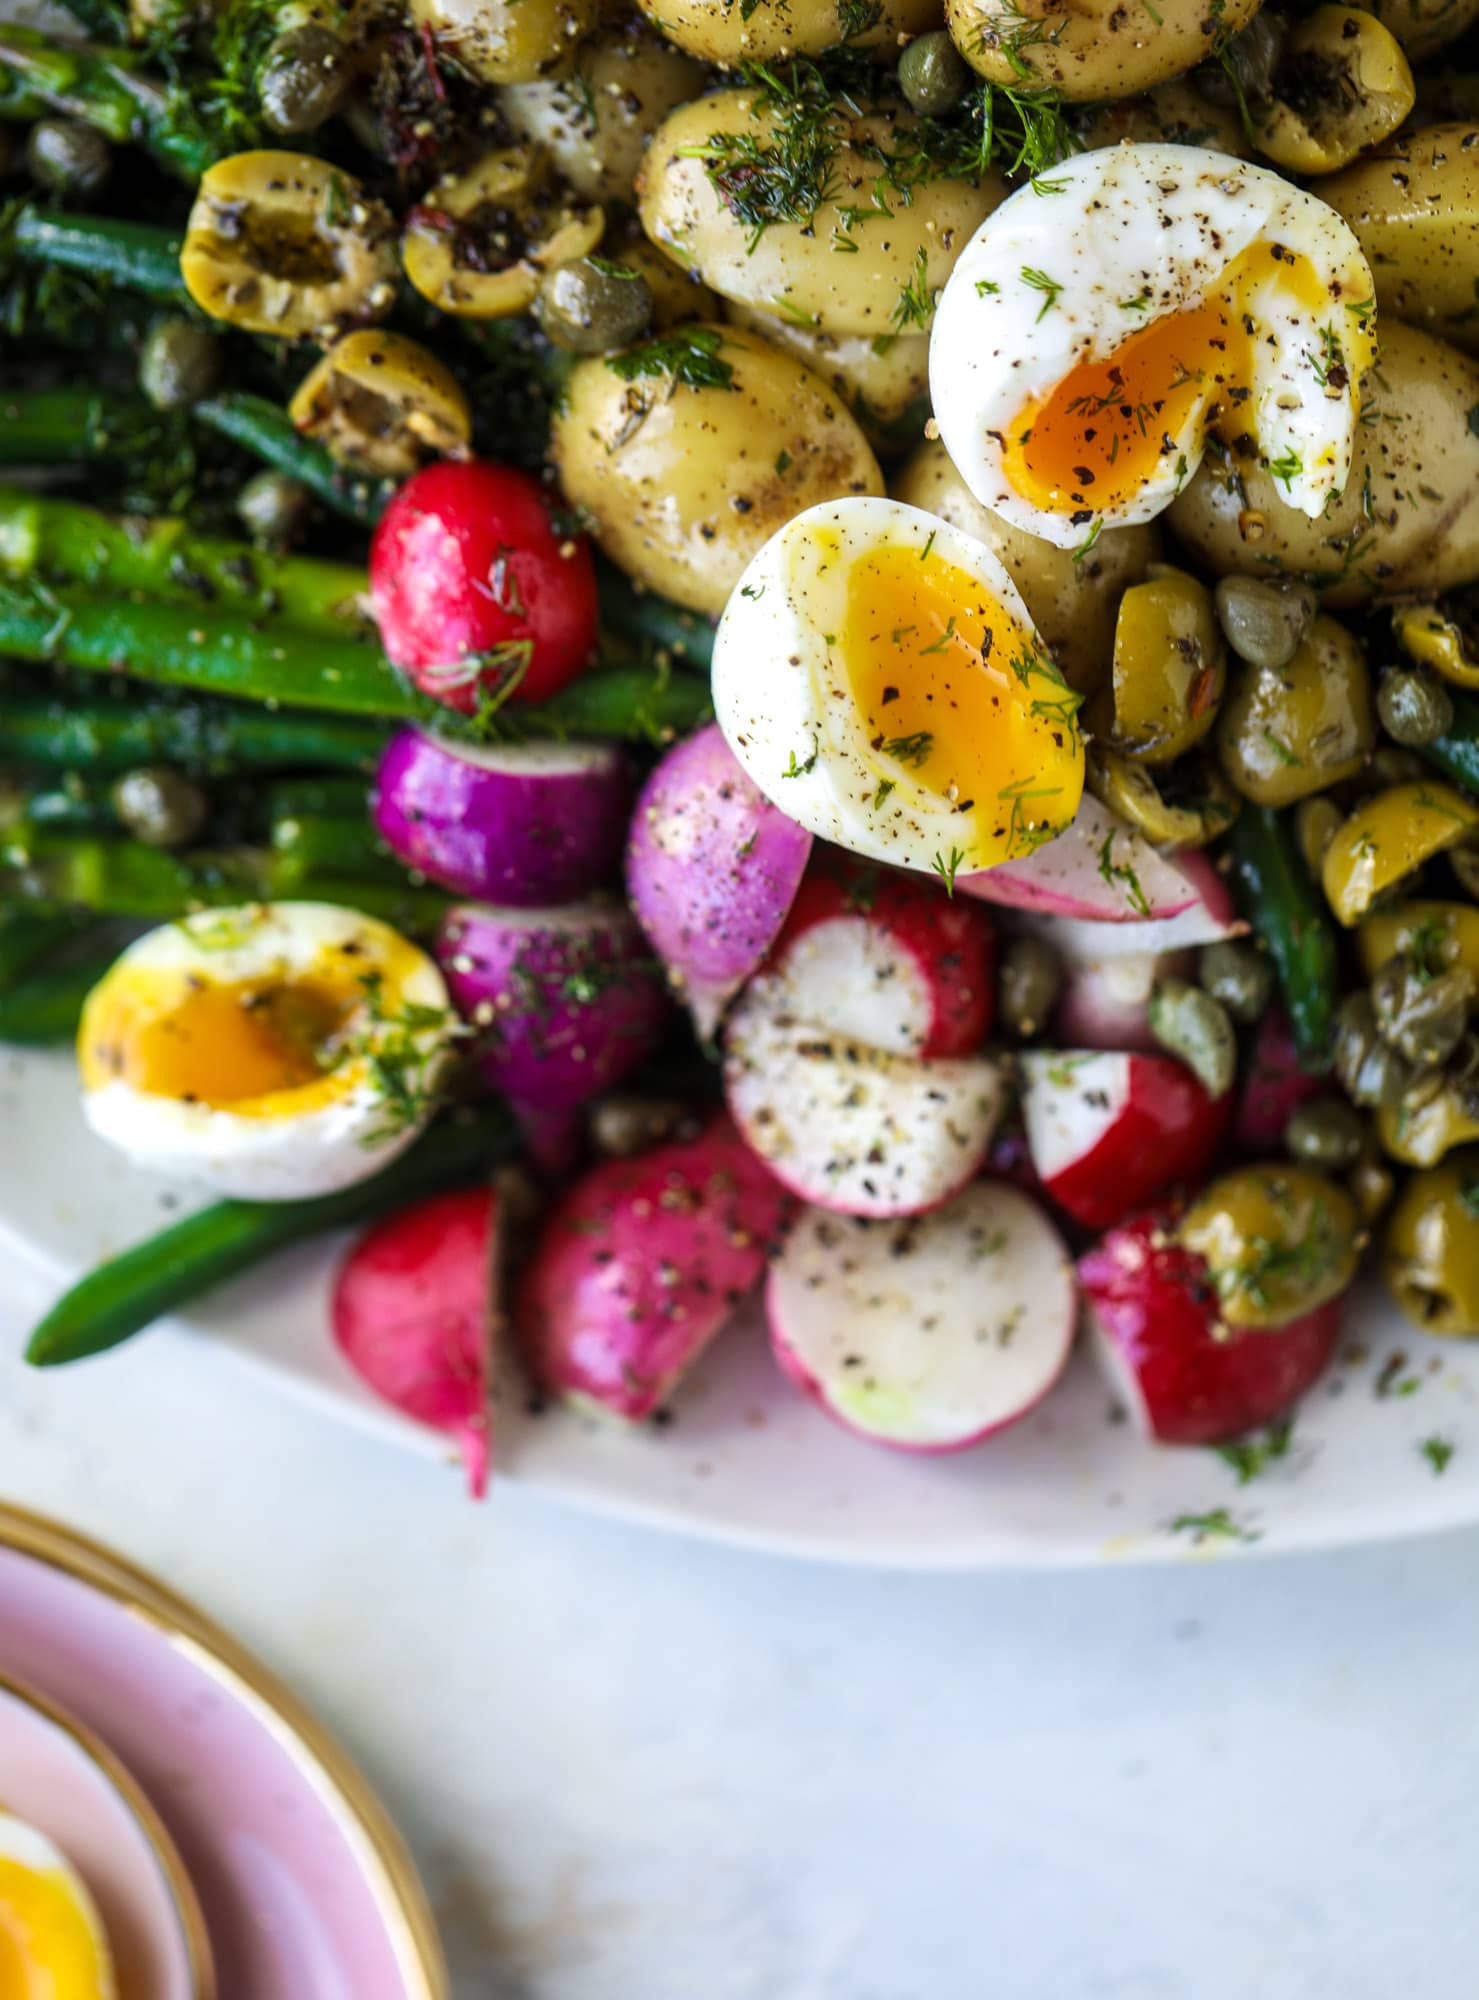 This spring version of the nicoise salad is loaded with crunchy green beans and asparagus, gorgeous radishes, tender potatoes and salty olives.